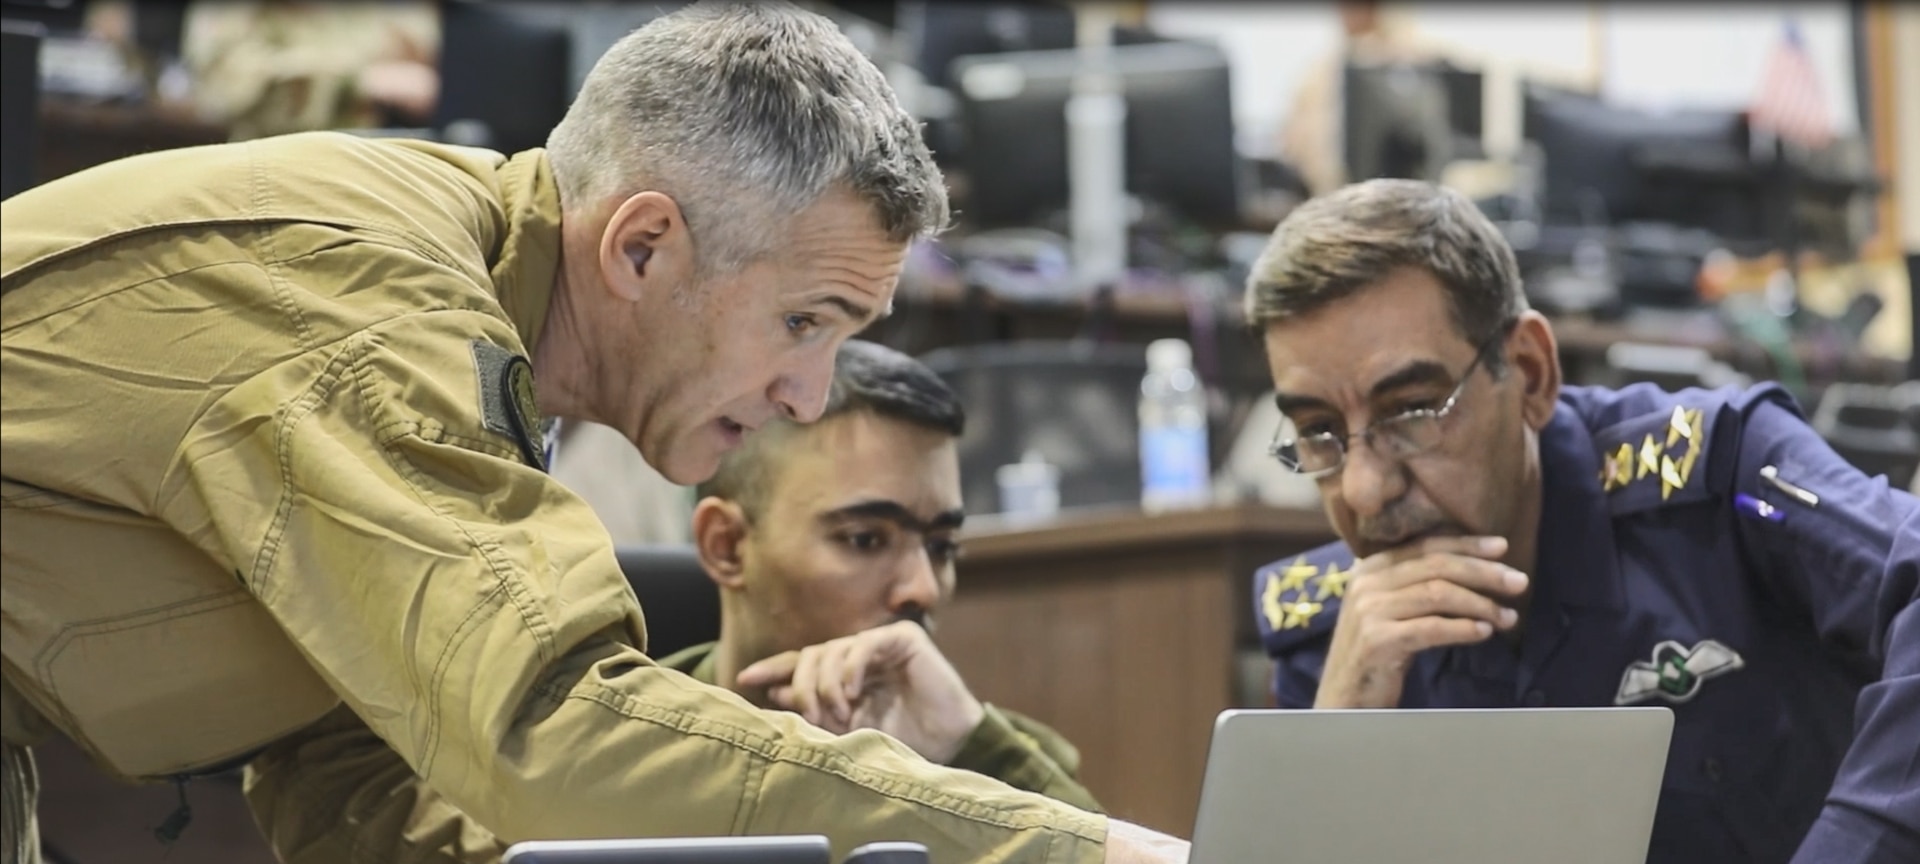 A French Air Force Air Advisor, part of the Military Advisory Group, advises Iraqi partner forces at the Joint Operation Center - Iraq in Baghdad, Iraq, Dec. 1, 2021. All Coalition activities are in line with the Combined Joint Task Force - Operation Inherent Resolve’s new 2022 Campaign Plan, as the Coalition continues its core mandate to maintain the enduring defeat of Daesh; by, with, and through partner forces that is made possible by Coalition advice, assistance, and enablement. (U.S. Army photo by Cpl. Jacob Gleich)